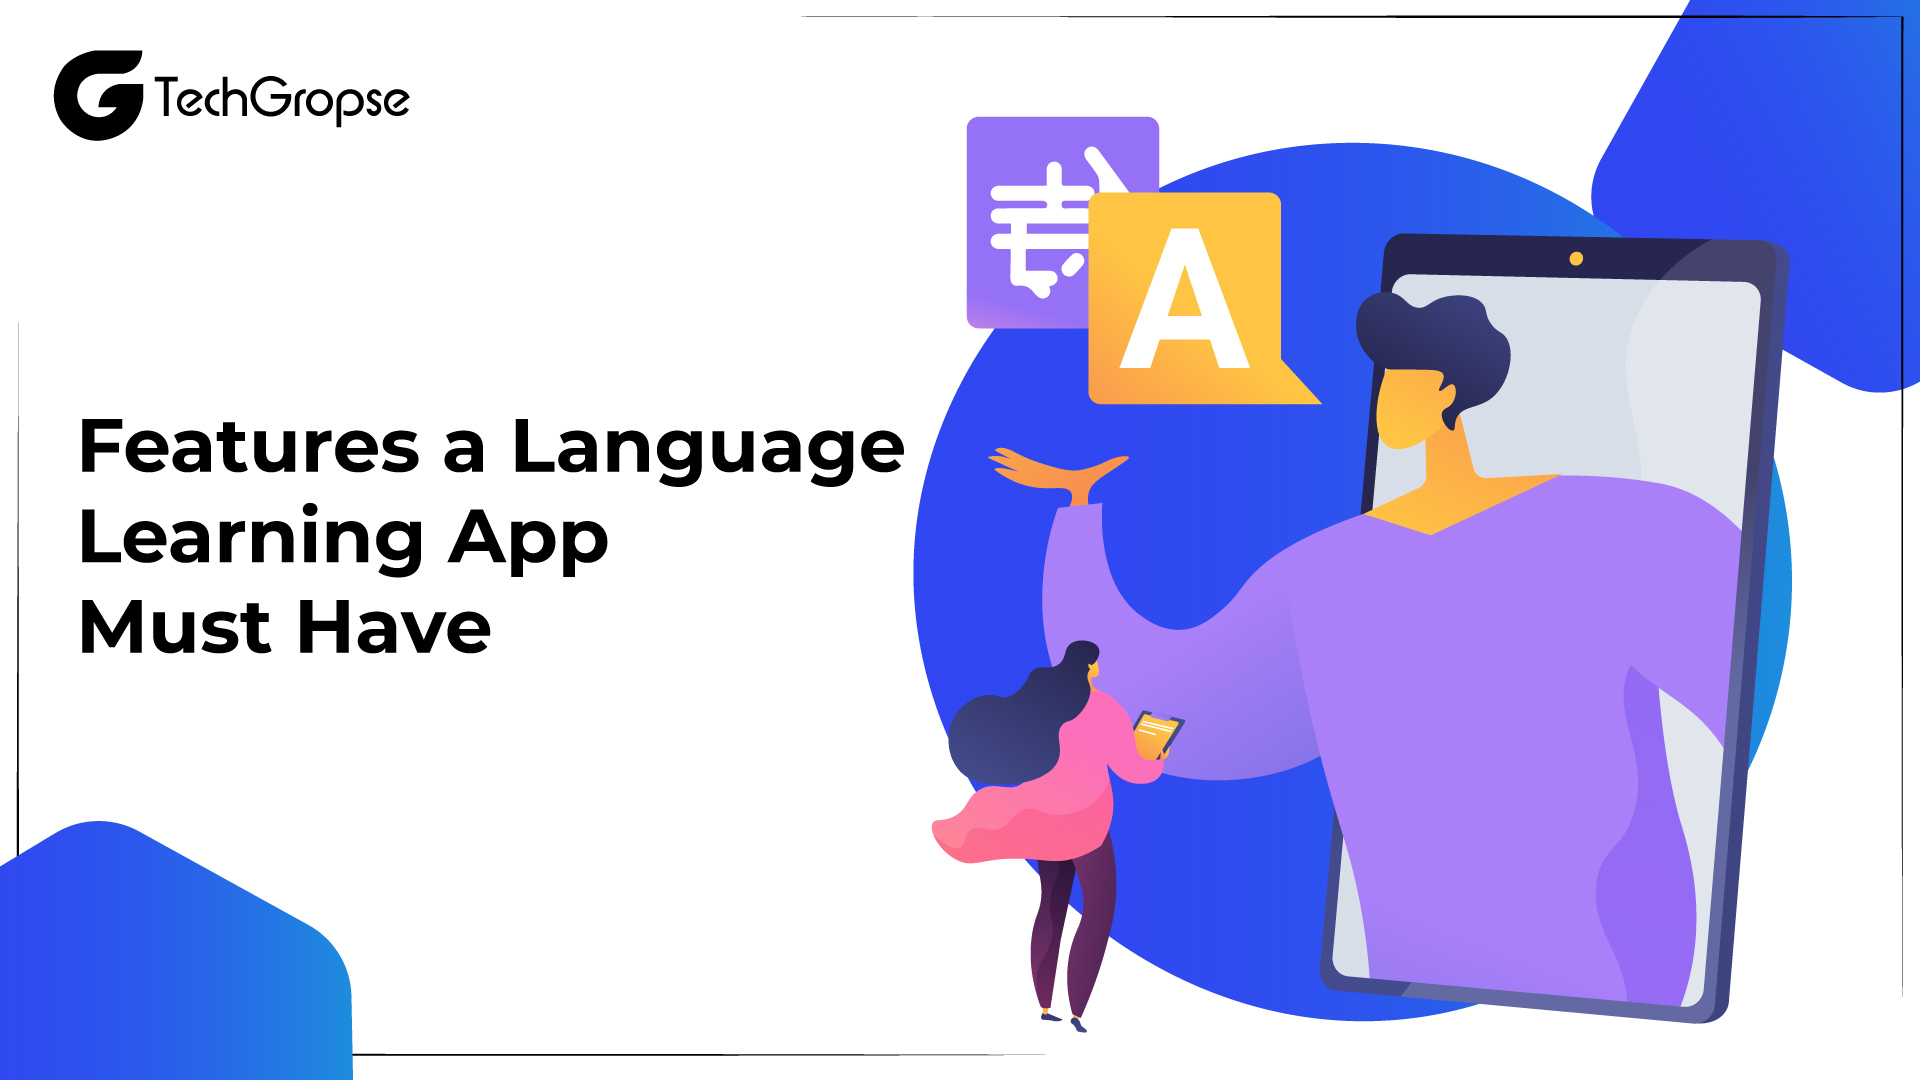 Features a Language Learning App Must Have